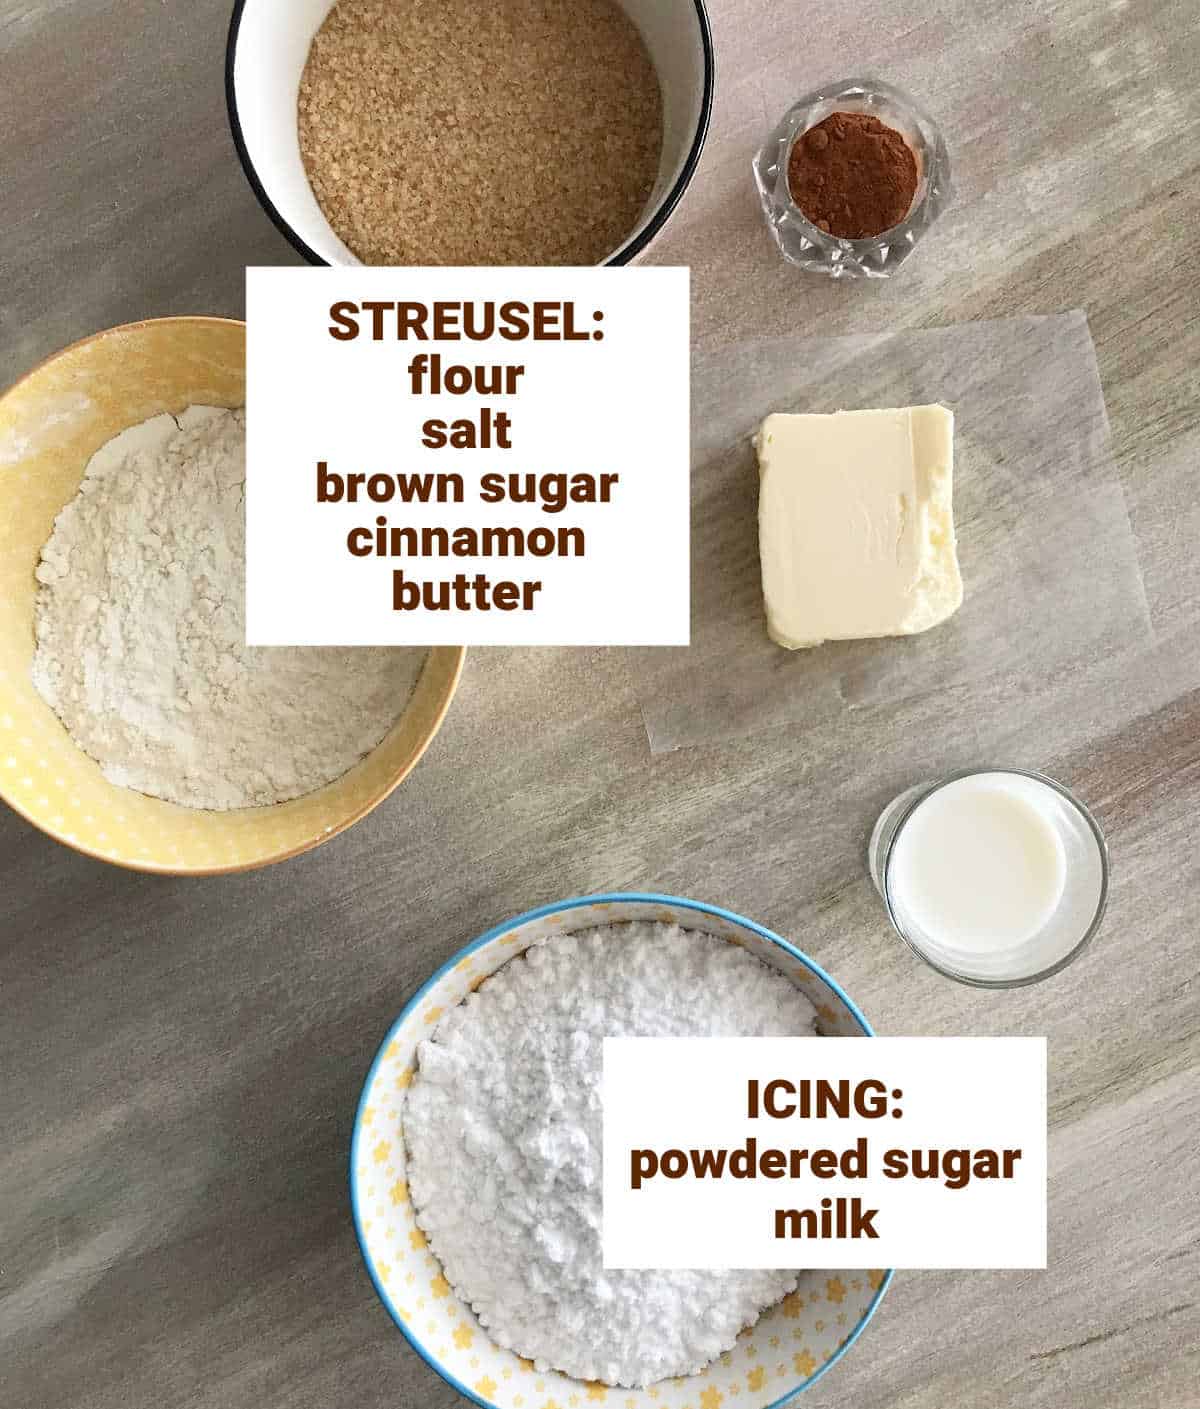 Colored bowls with ingredients for brown sugar cinnamon streusel and powdered sugar icing; brownish surface.